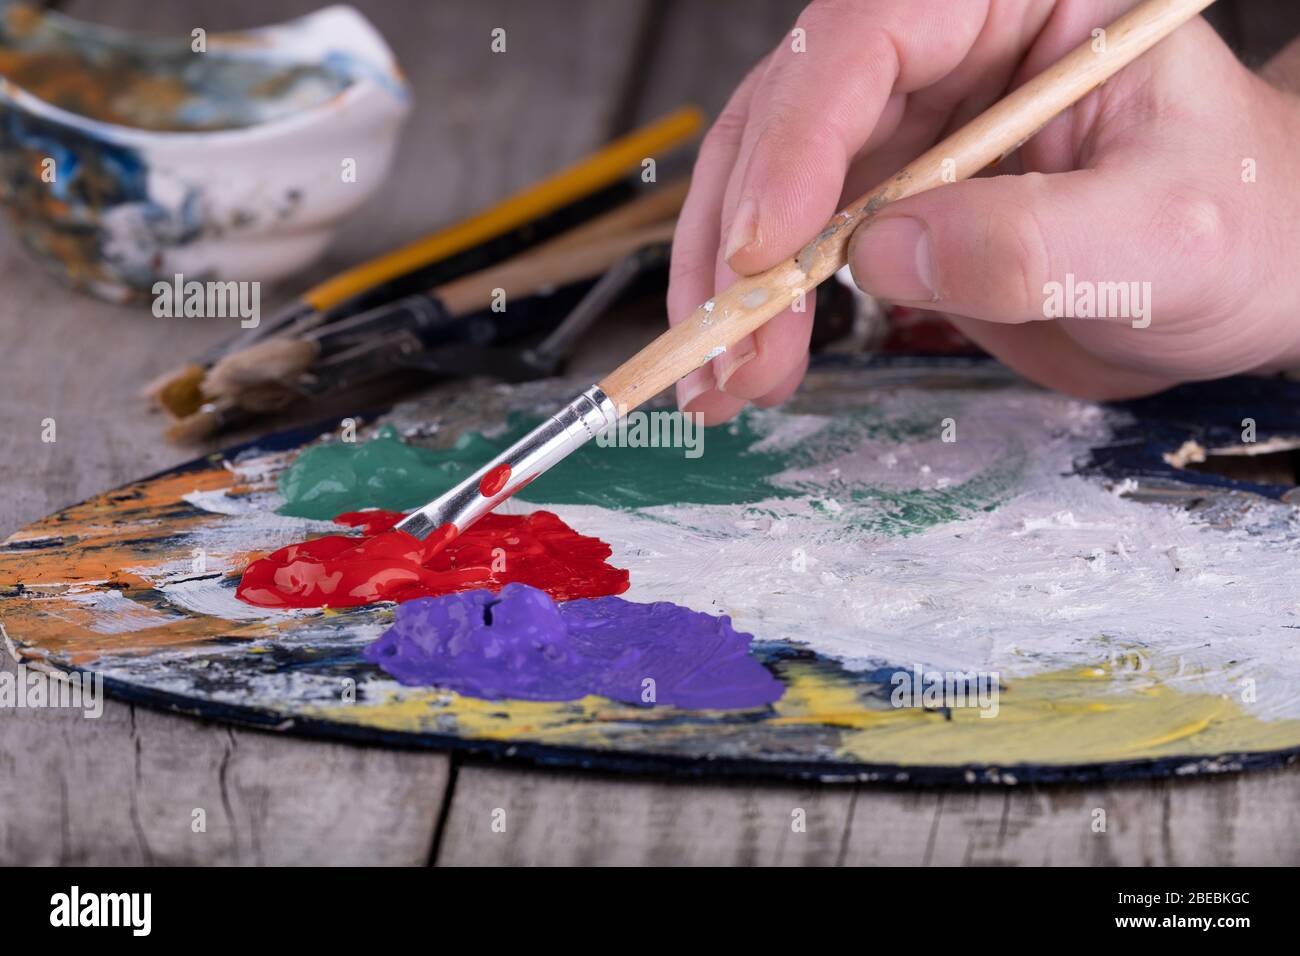 Fine art school. Closeup of wooden palette with acrylic paint and paintbrush in artist hands. Stock Photo